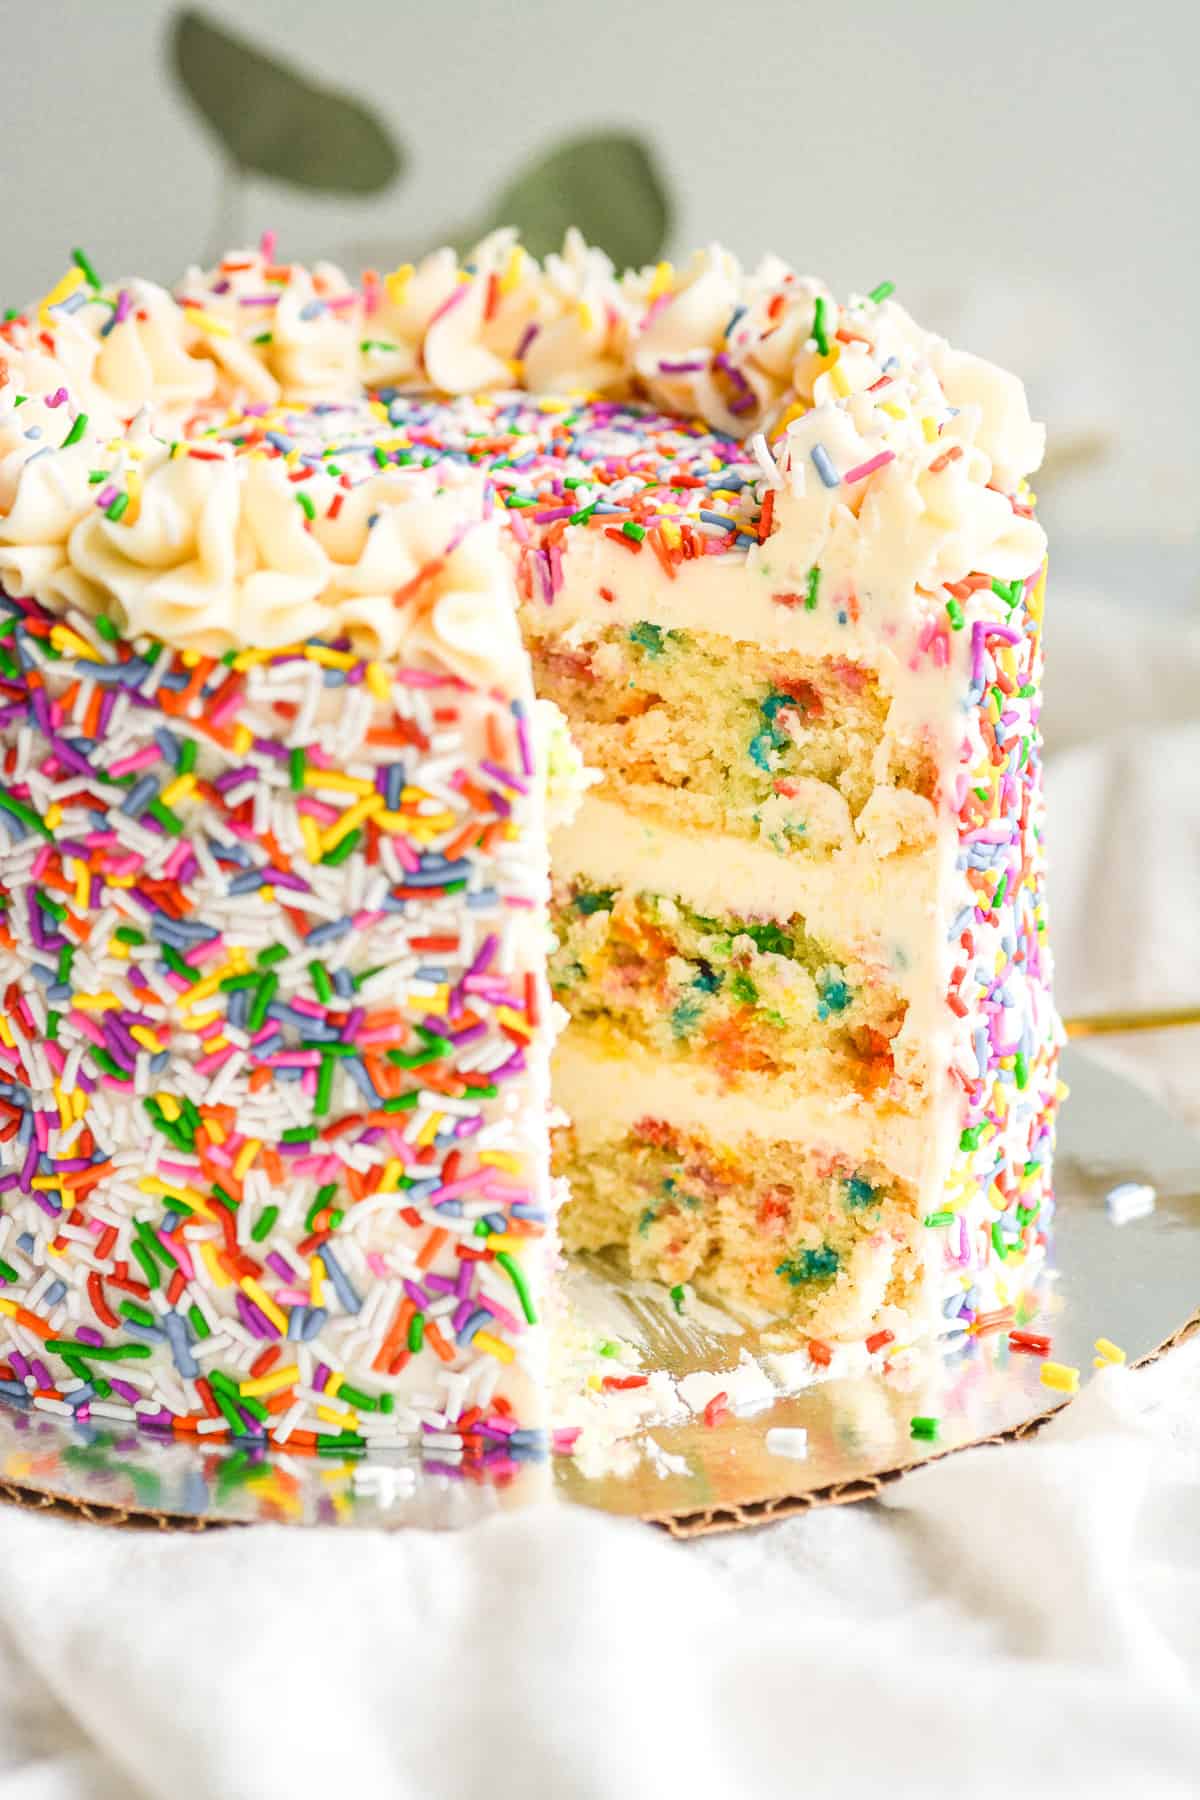 Vegan Funfetti cake with a slice taken out of it to see the cross section.